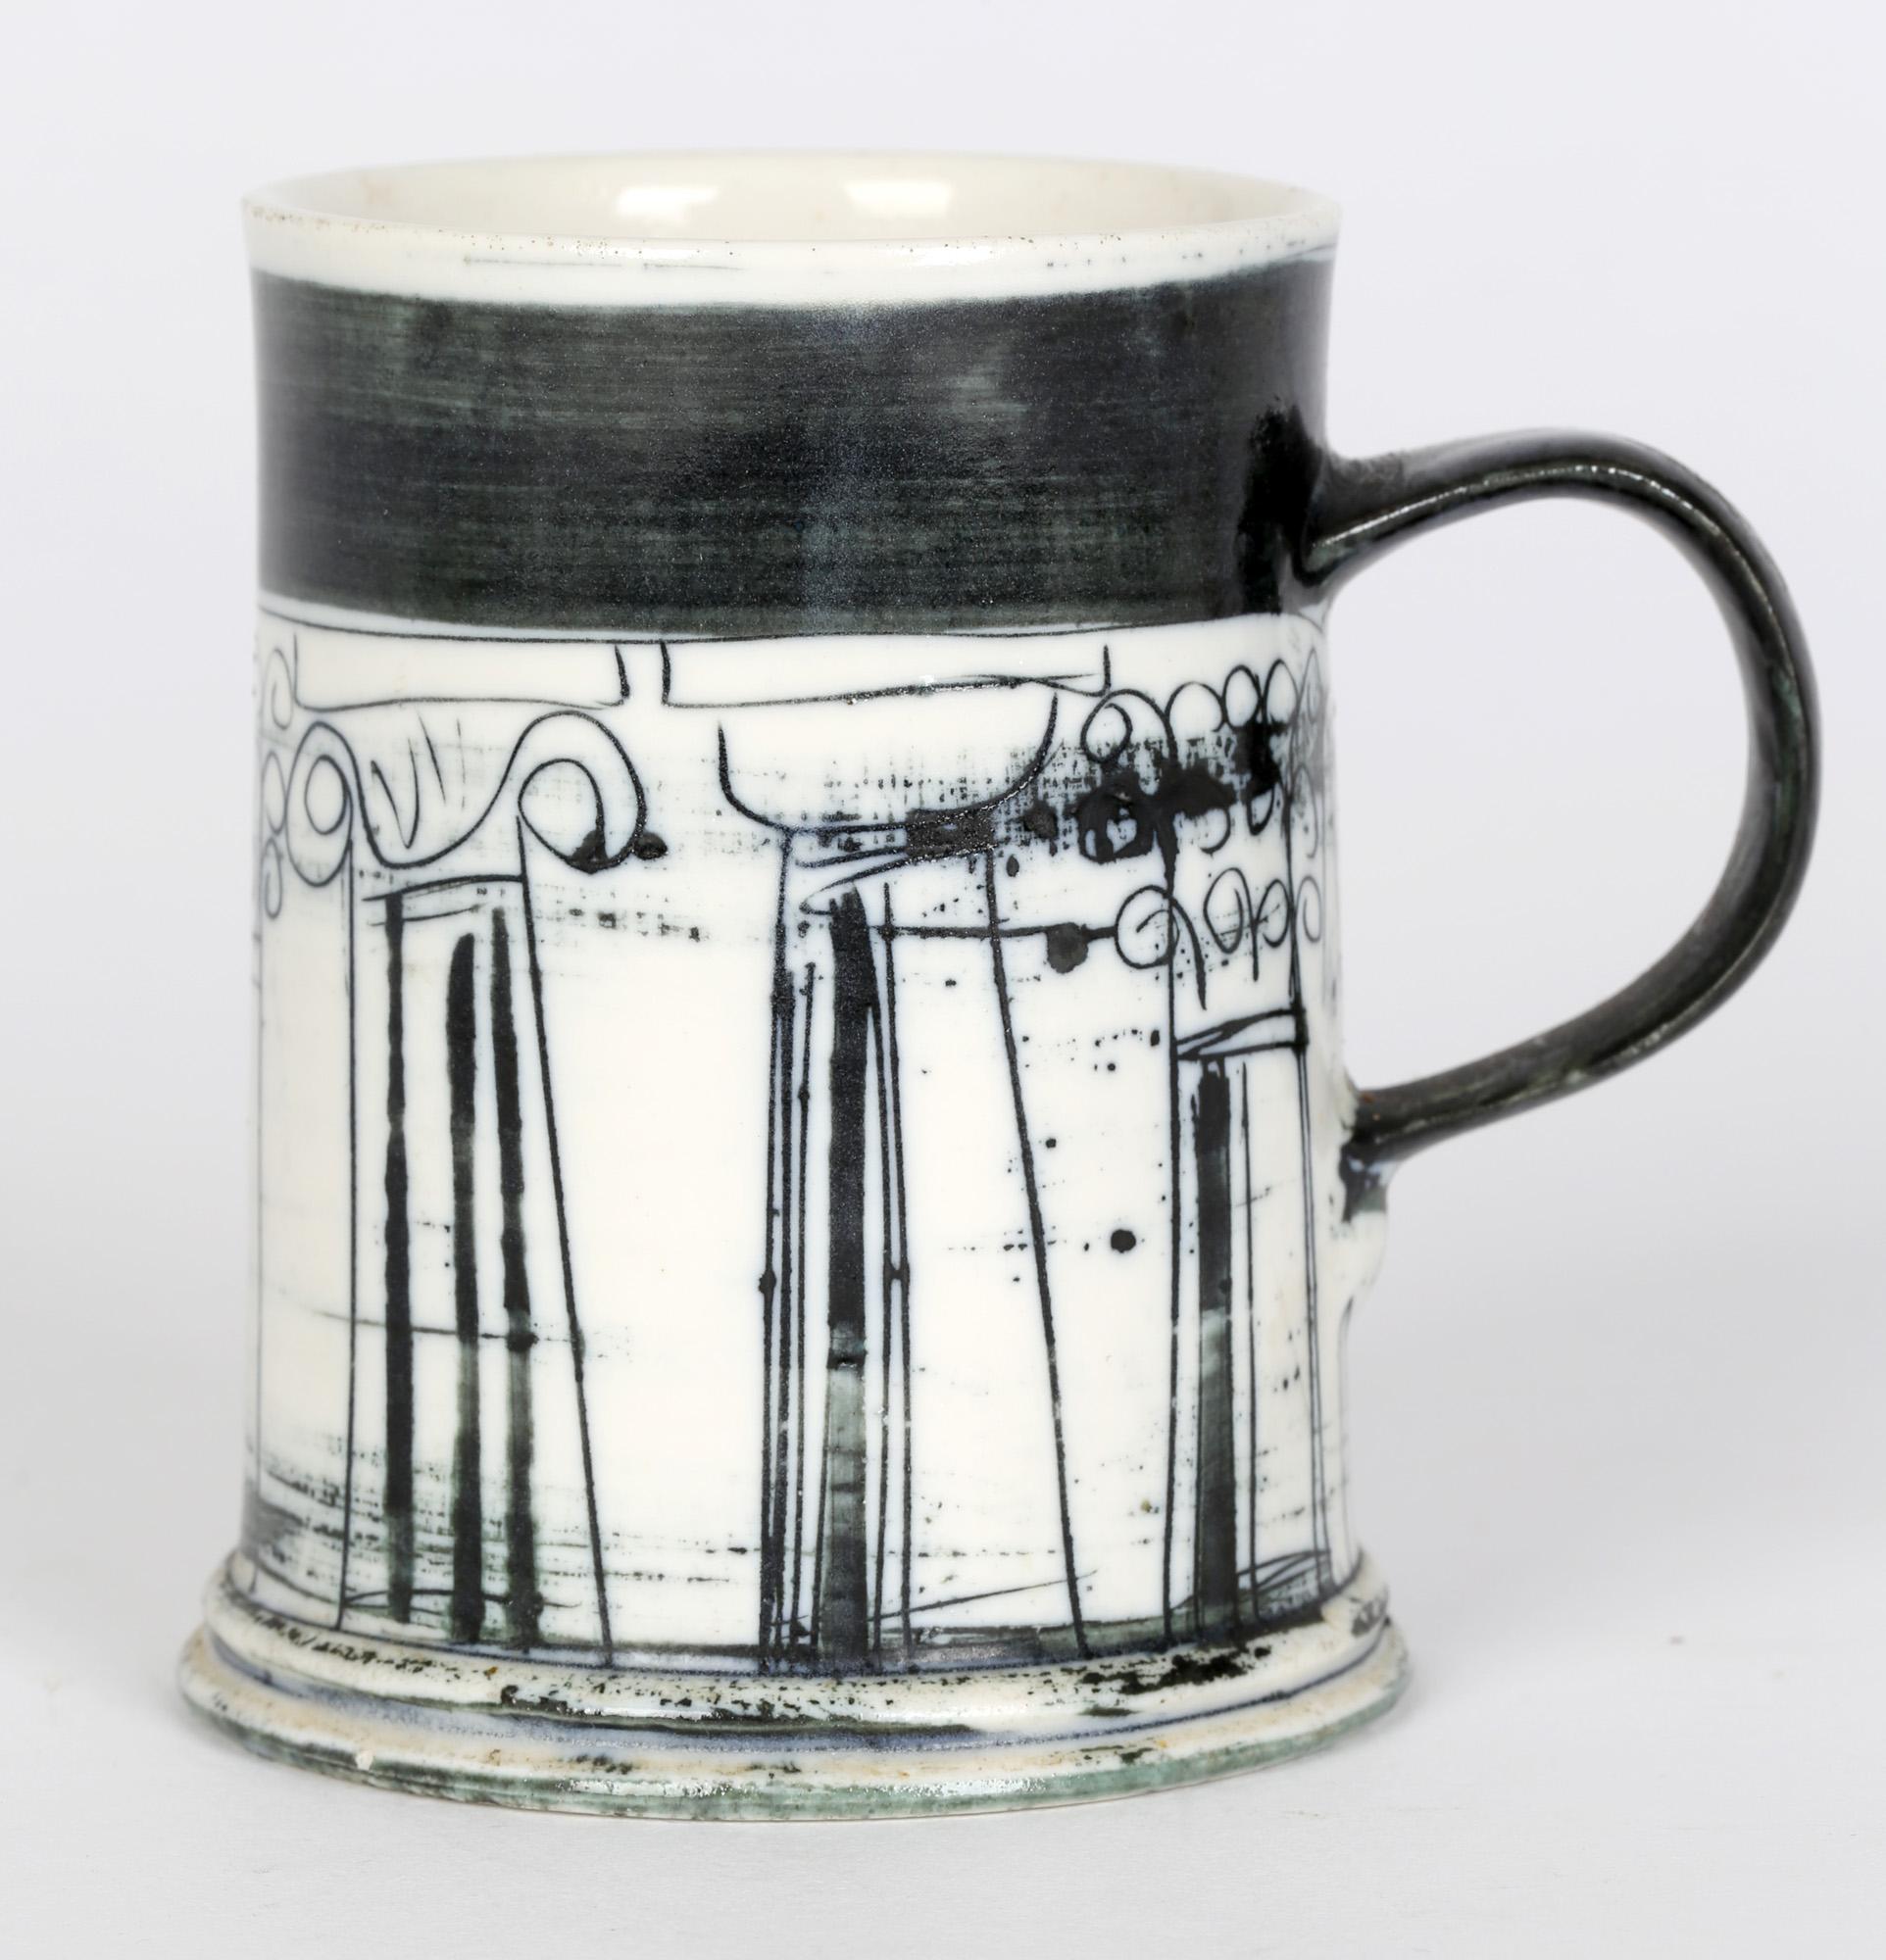 A very stylish studio pottery porcelain mug decorated with columns design by Susan Parkinson for the Richard Parkinson Pottery and made between 1953 and 1962. This delightful handled mug of slight conical shape was made when Sue and Richard worked